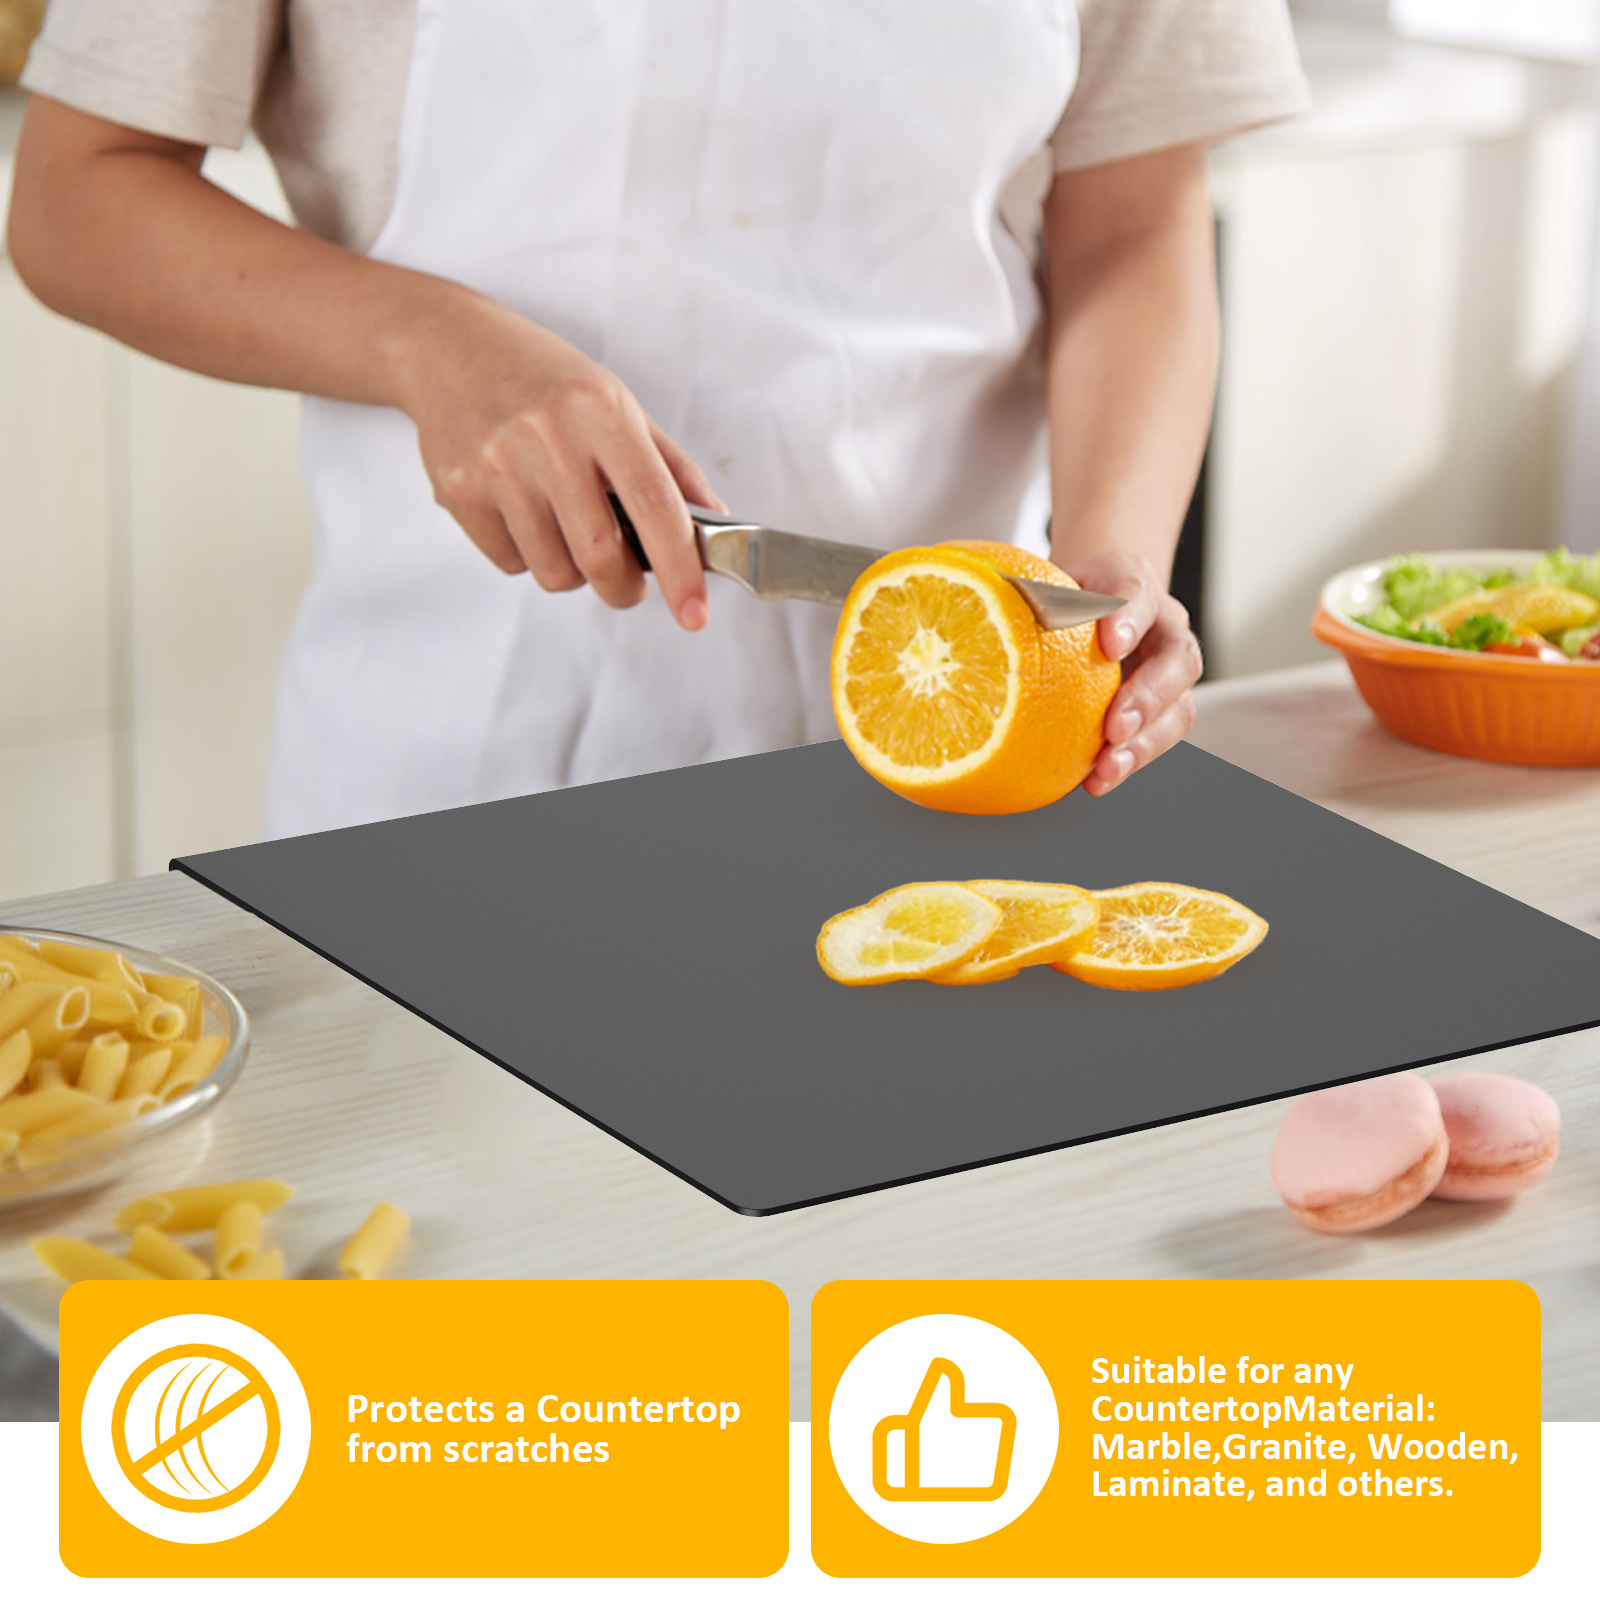 Acrylic Cutting Board Transparent Cutting Board With Lip Edge 40x45cm  Reusable Cutting Board Rectangle Chopping Board Clear Countertop Protector  Board For Kitchen Countertop